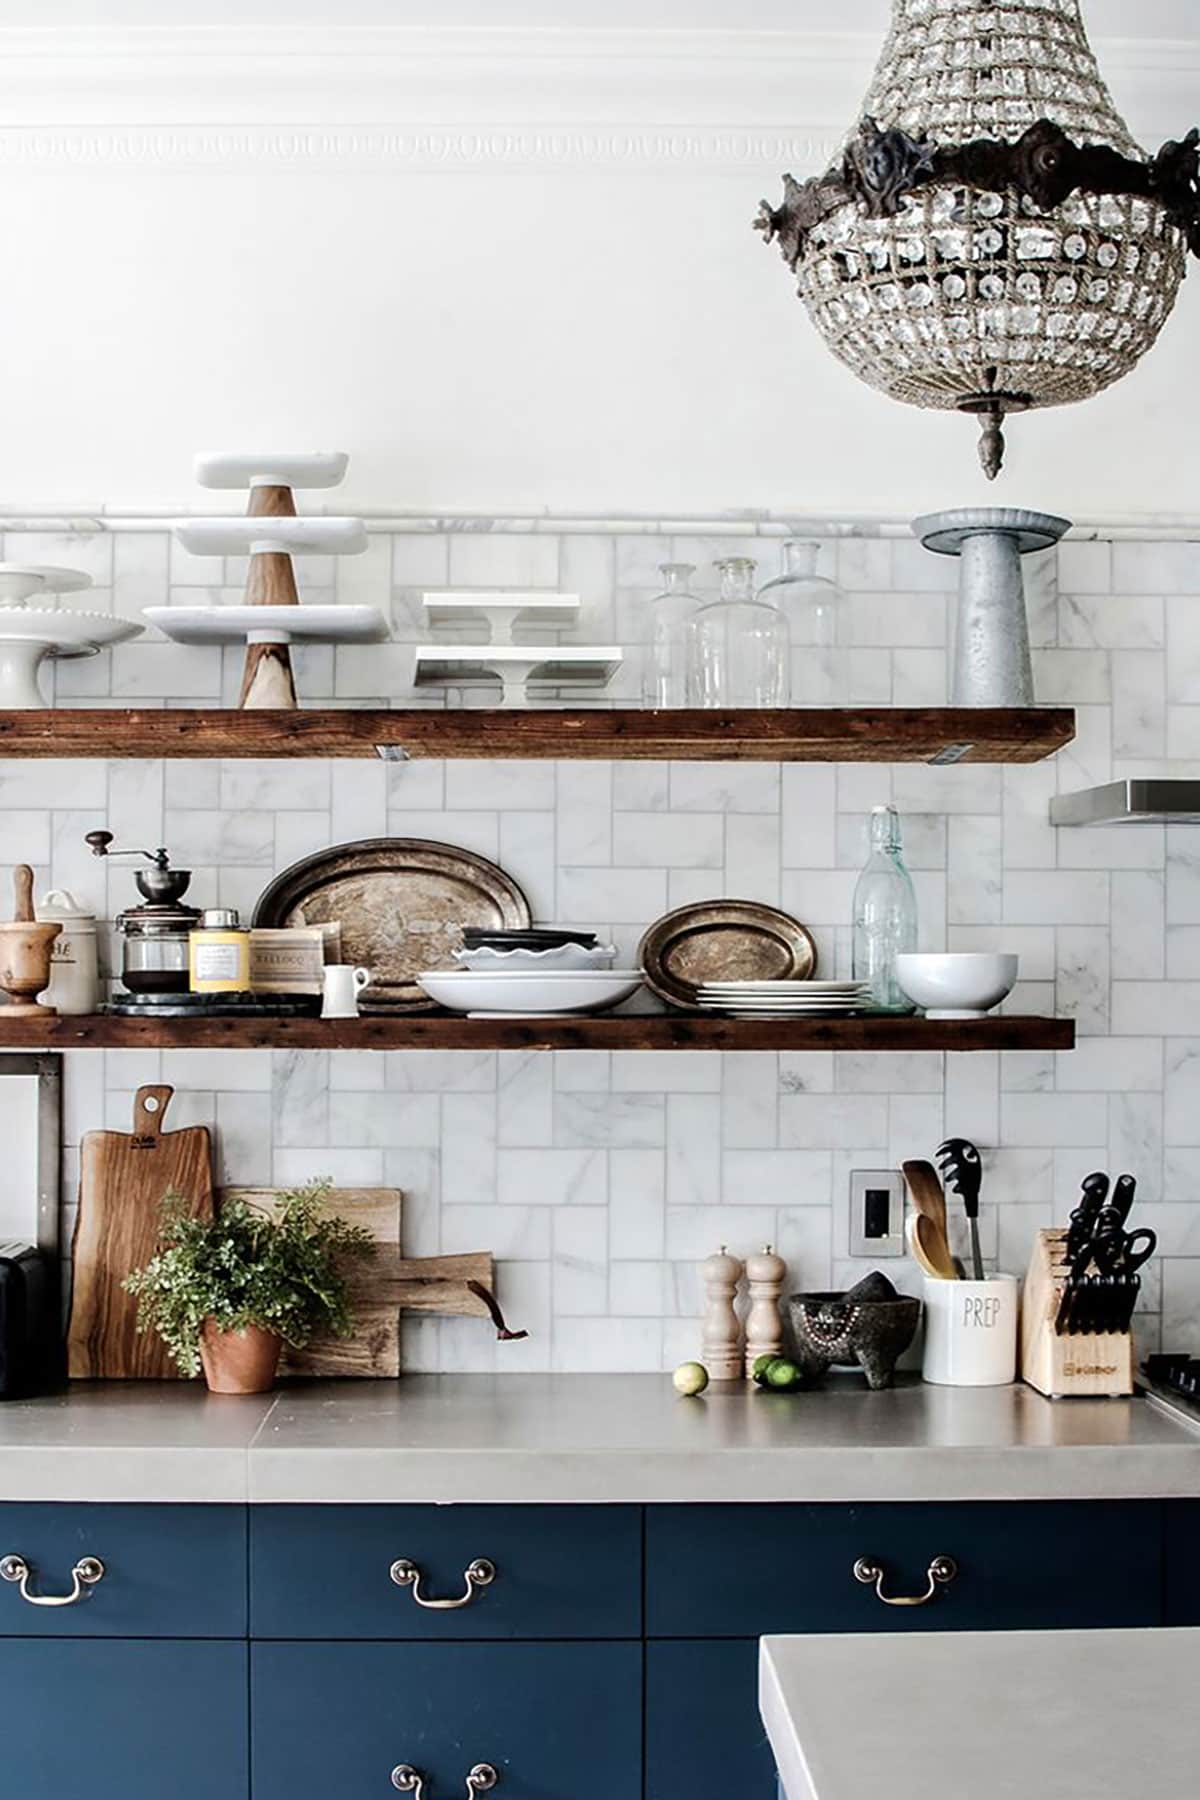 https://houseofhipsters.com/wp-content/uploads/2015/12/vintage-eclectic-kitchen-chandelier-navy-cabinets.jpg